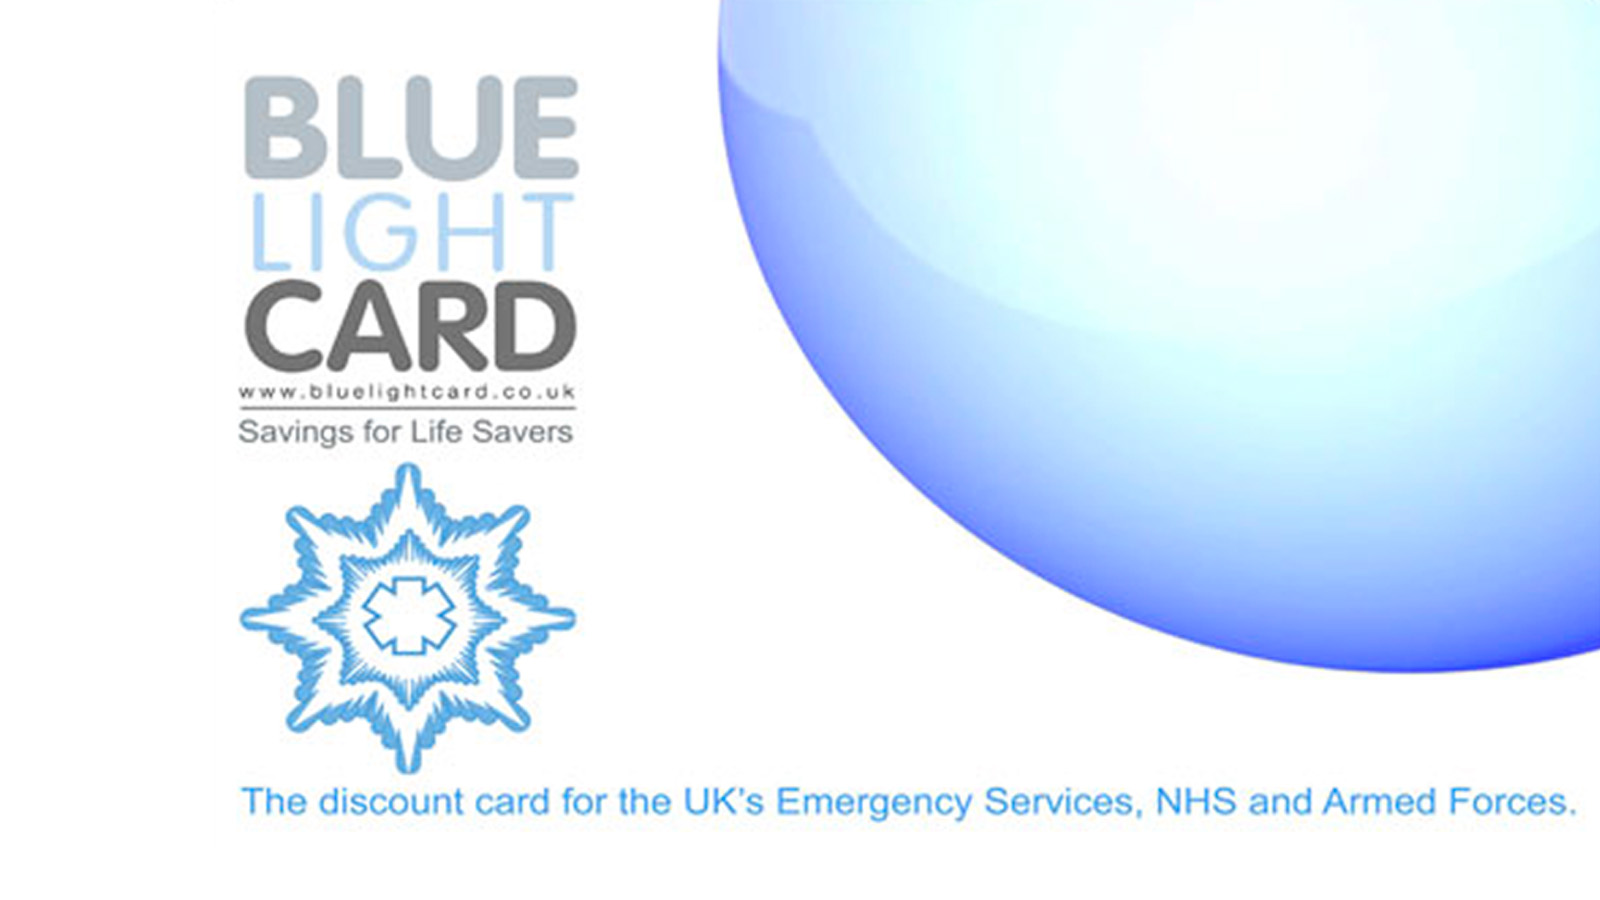 Savings for Life Savers - our new partnership with Blue Light Card